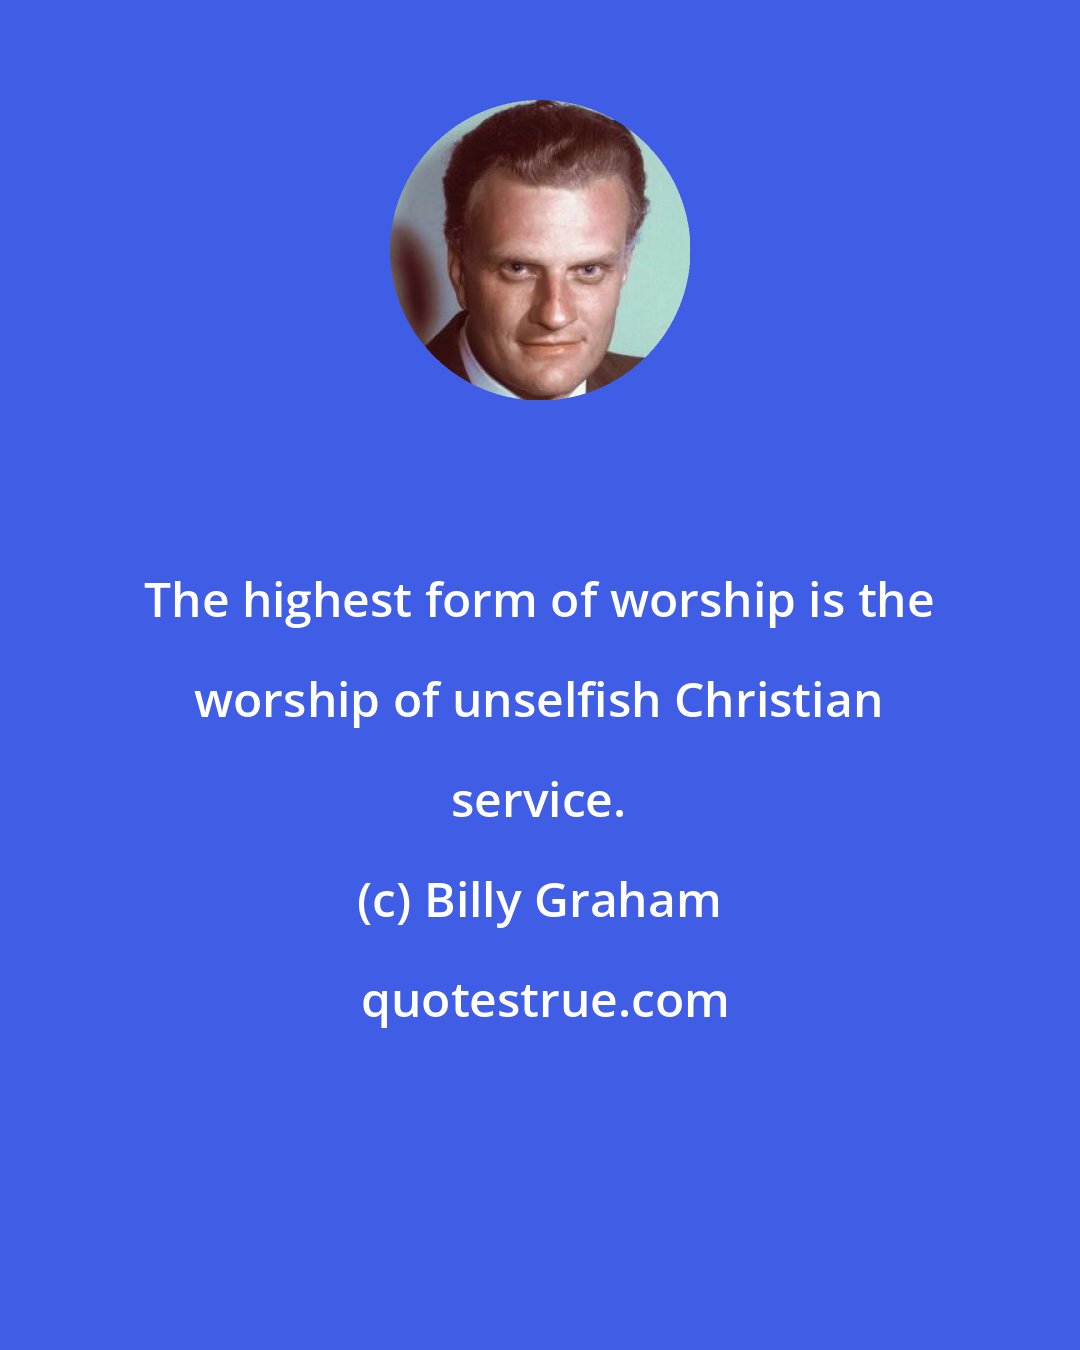 Billy Graham: The highest form of worship is the worship of unselfish Christian service.